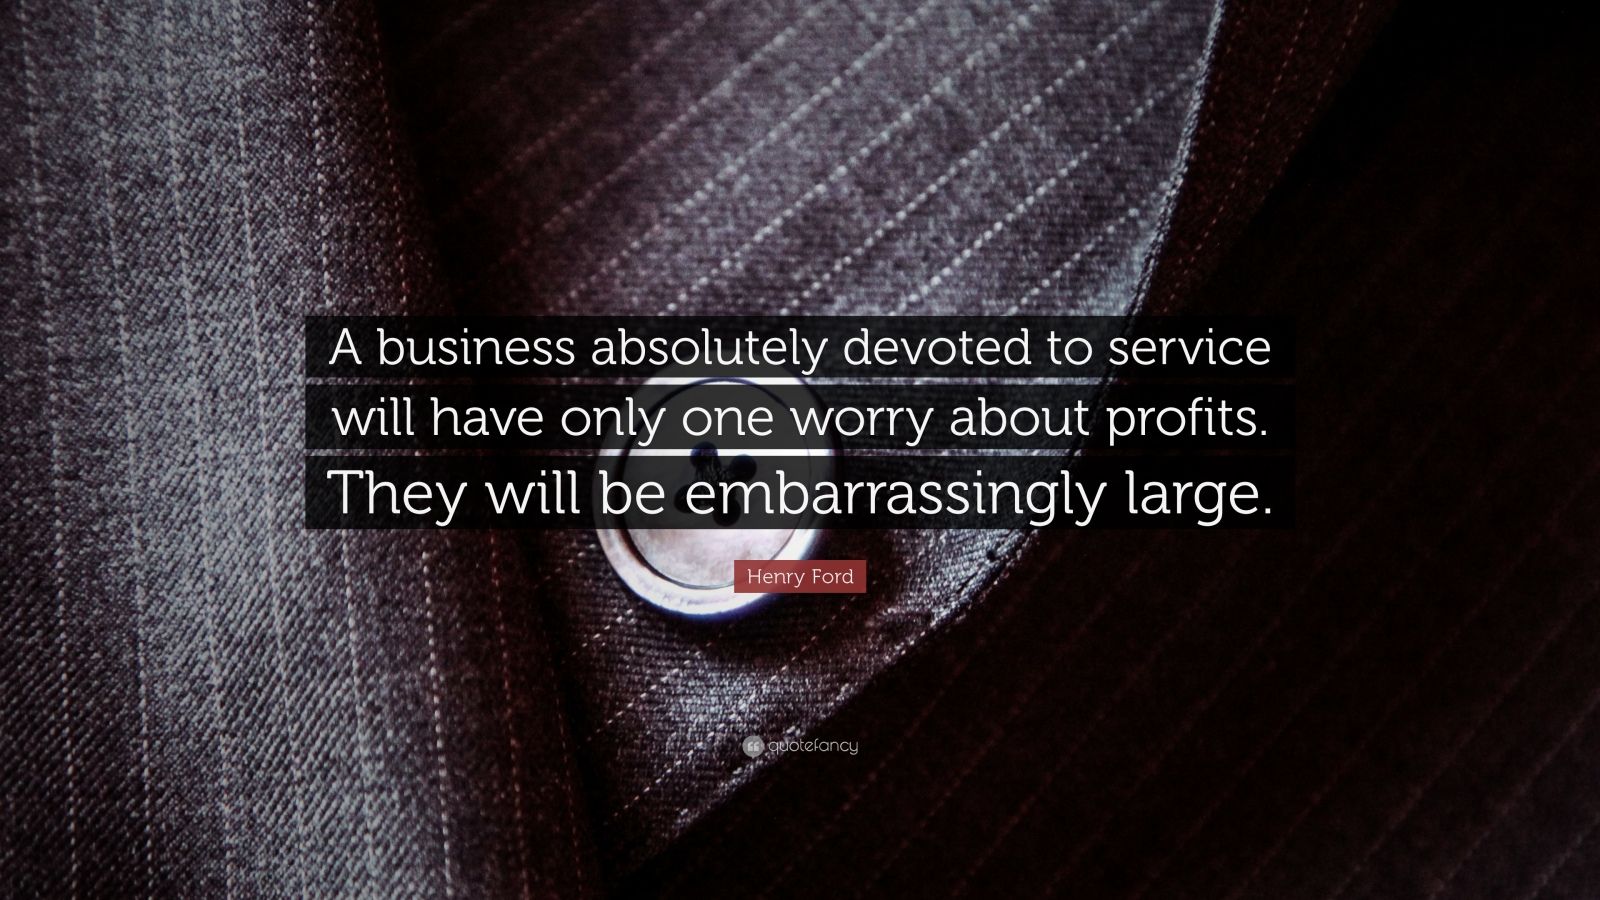 Henry ford quotations about business